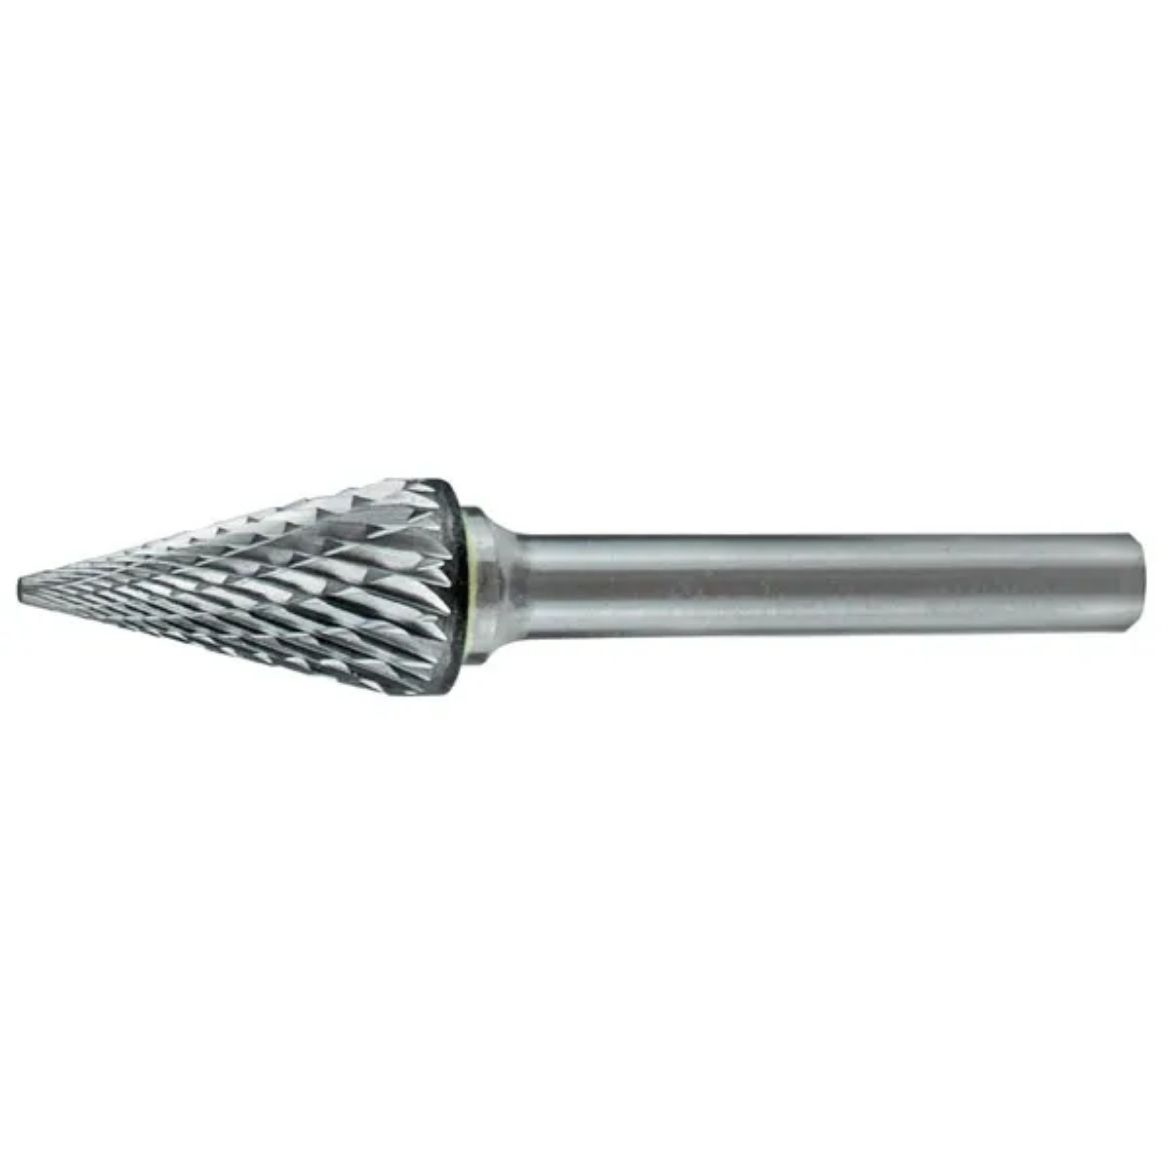 Picture of HOLEMAKER CARBIDE BURR, CONE SHAPE, 3/8" X 3/4" HEAD, 1/4" SHANK DC